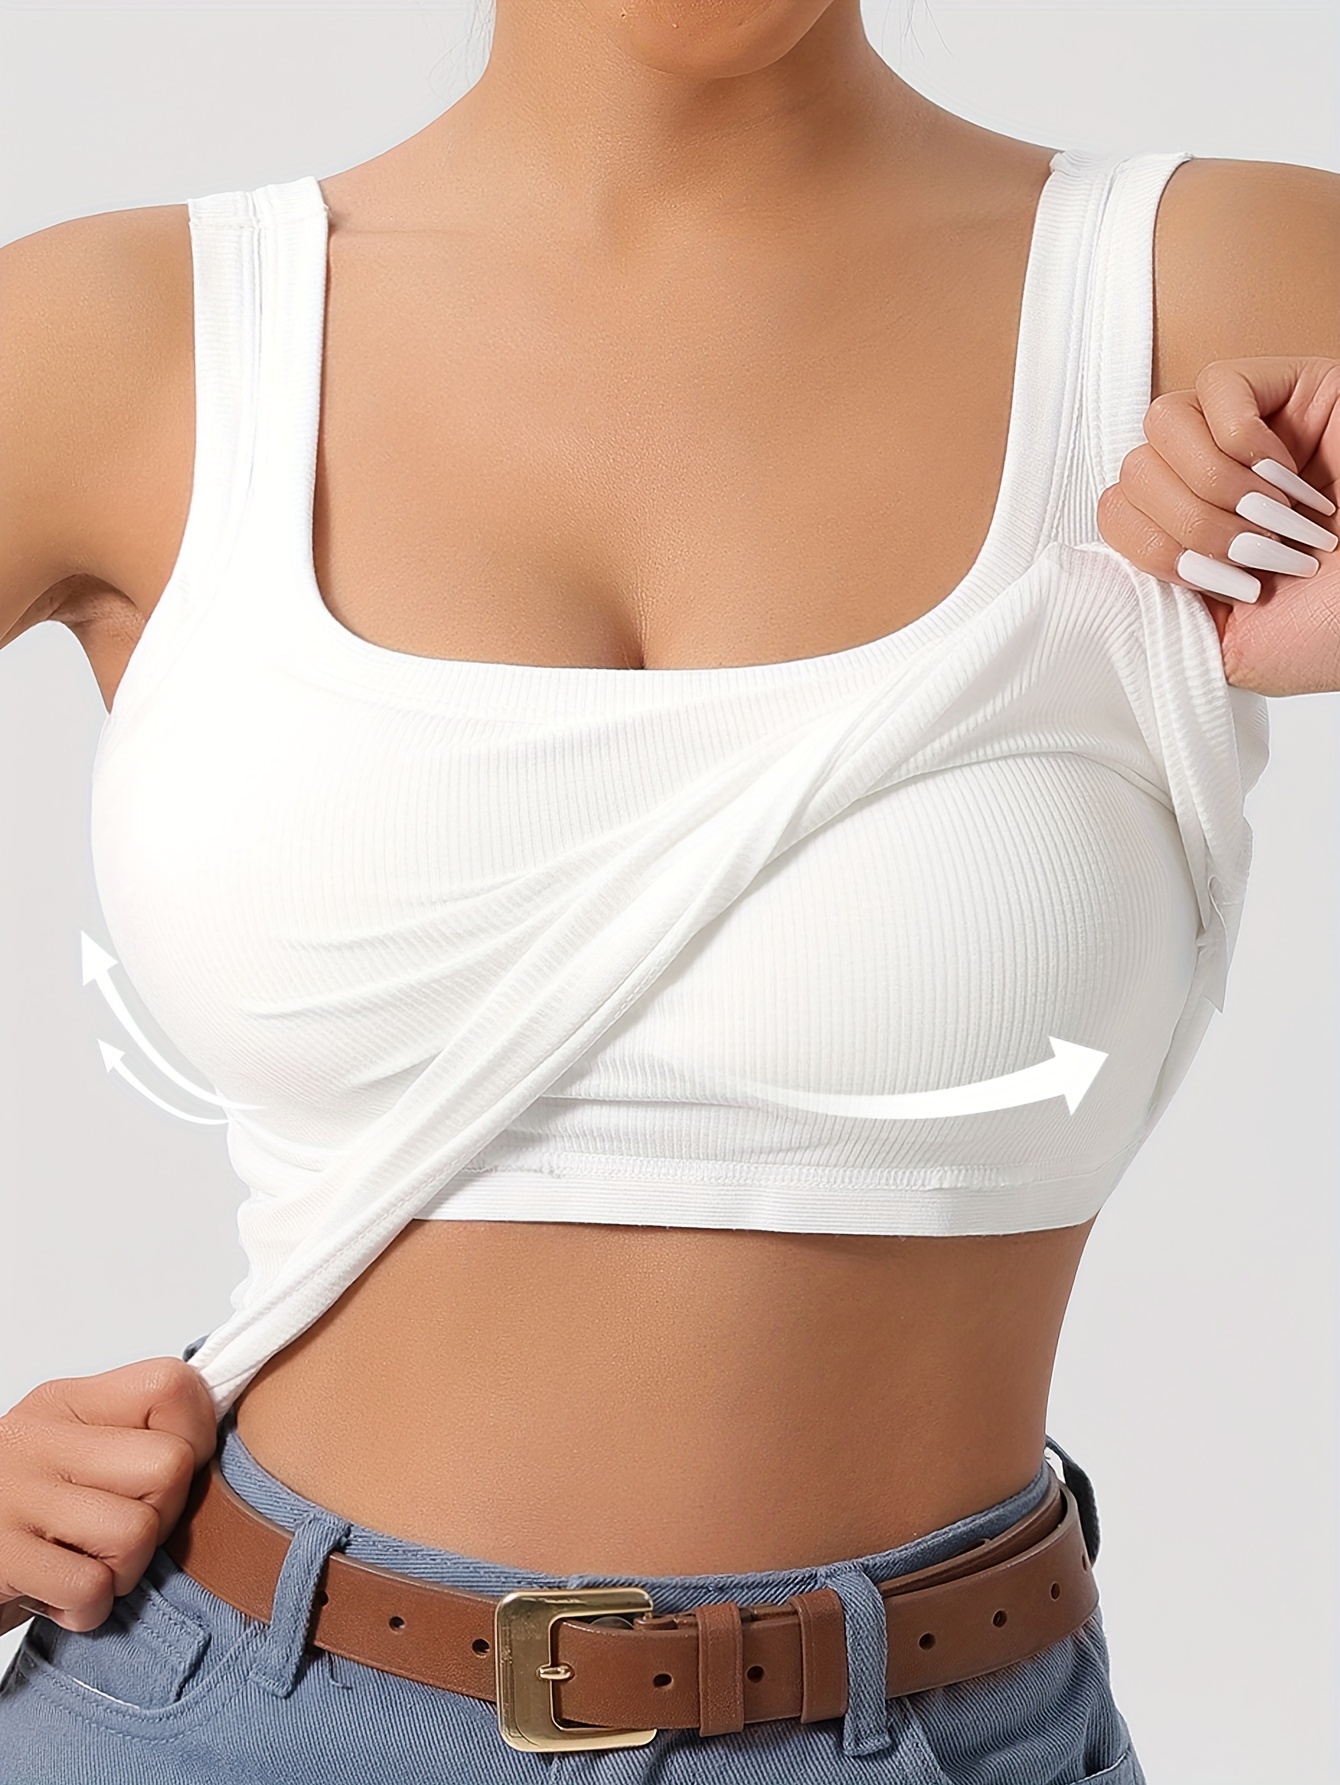 Breathable Bra Tank with Built in Bra Tank Tops Strap Stretch Cotton  Camisole with Built in Padded Shelf Bra Bras